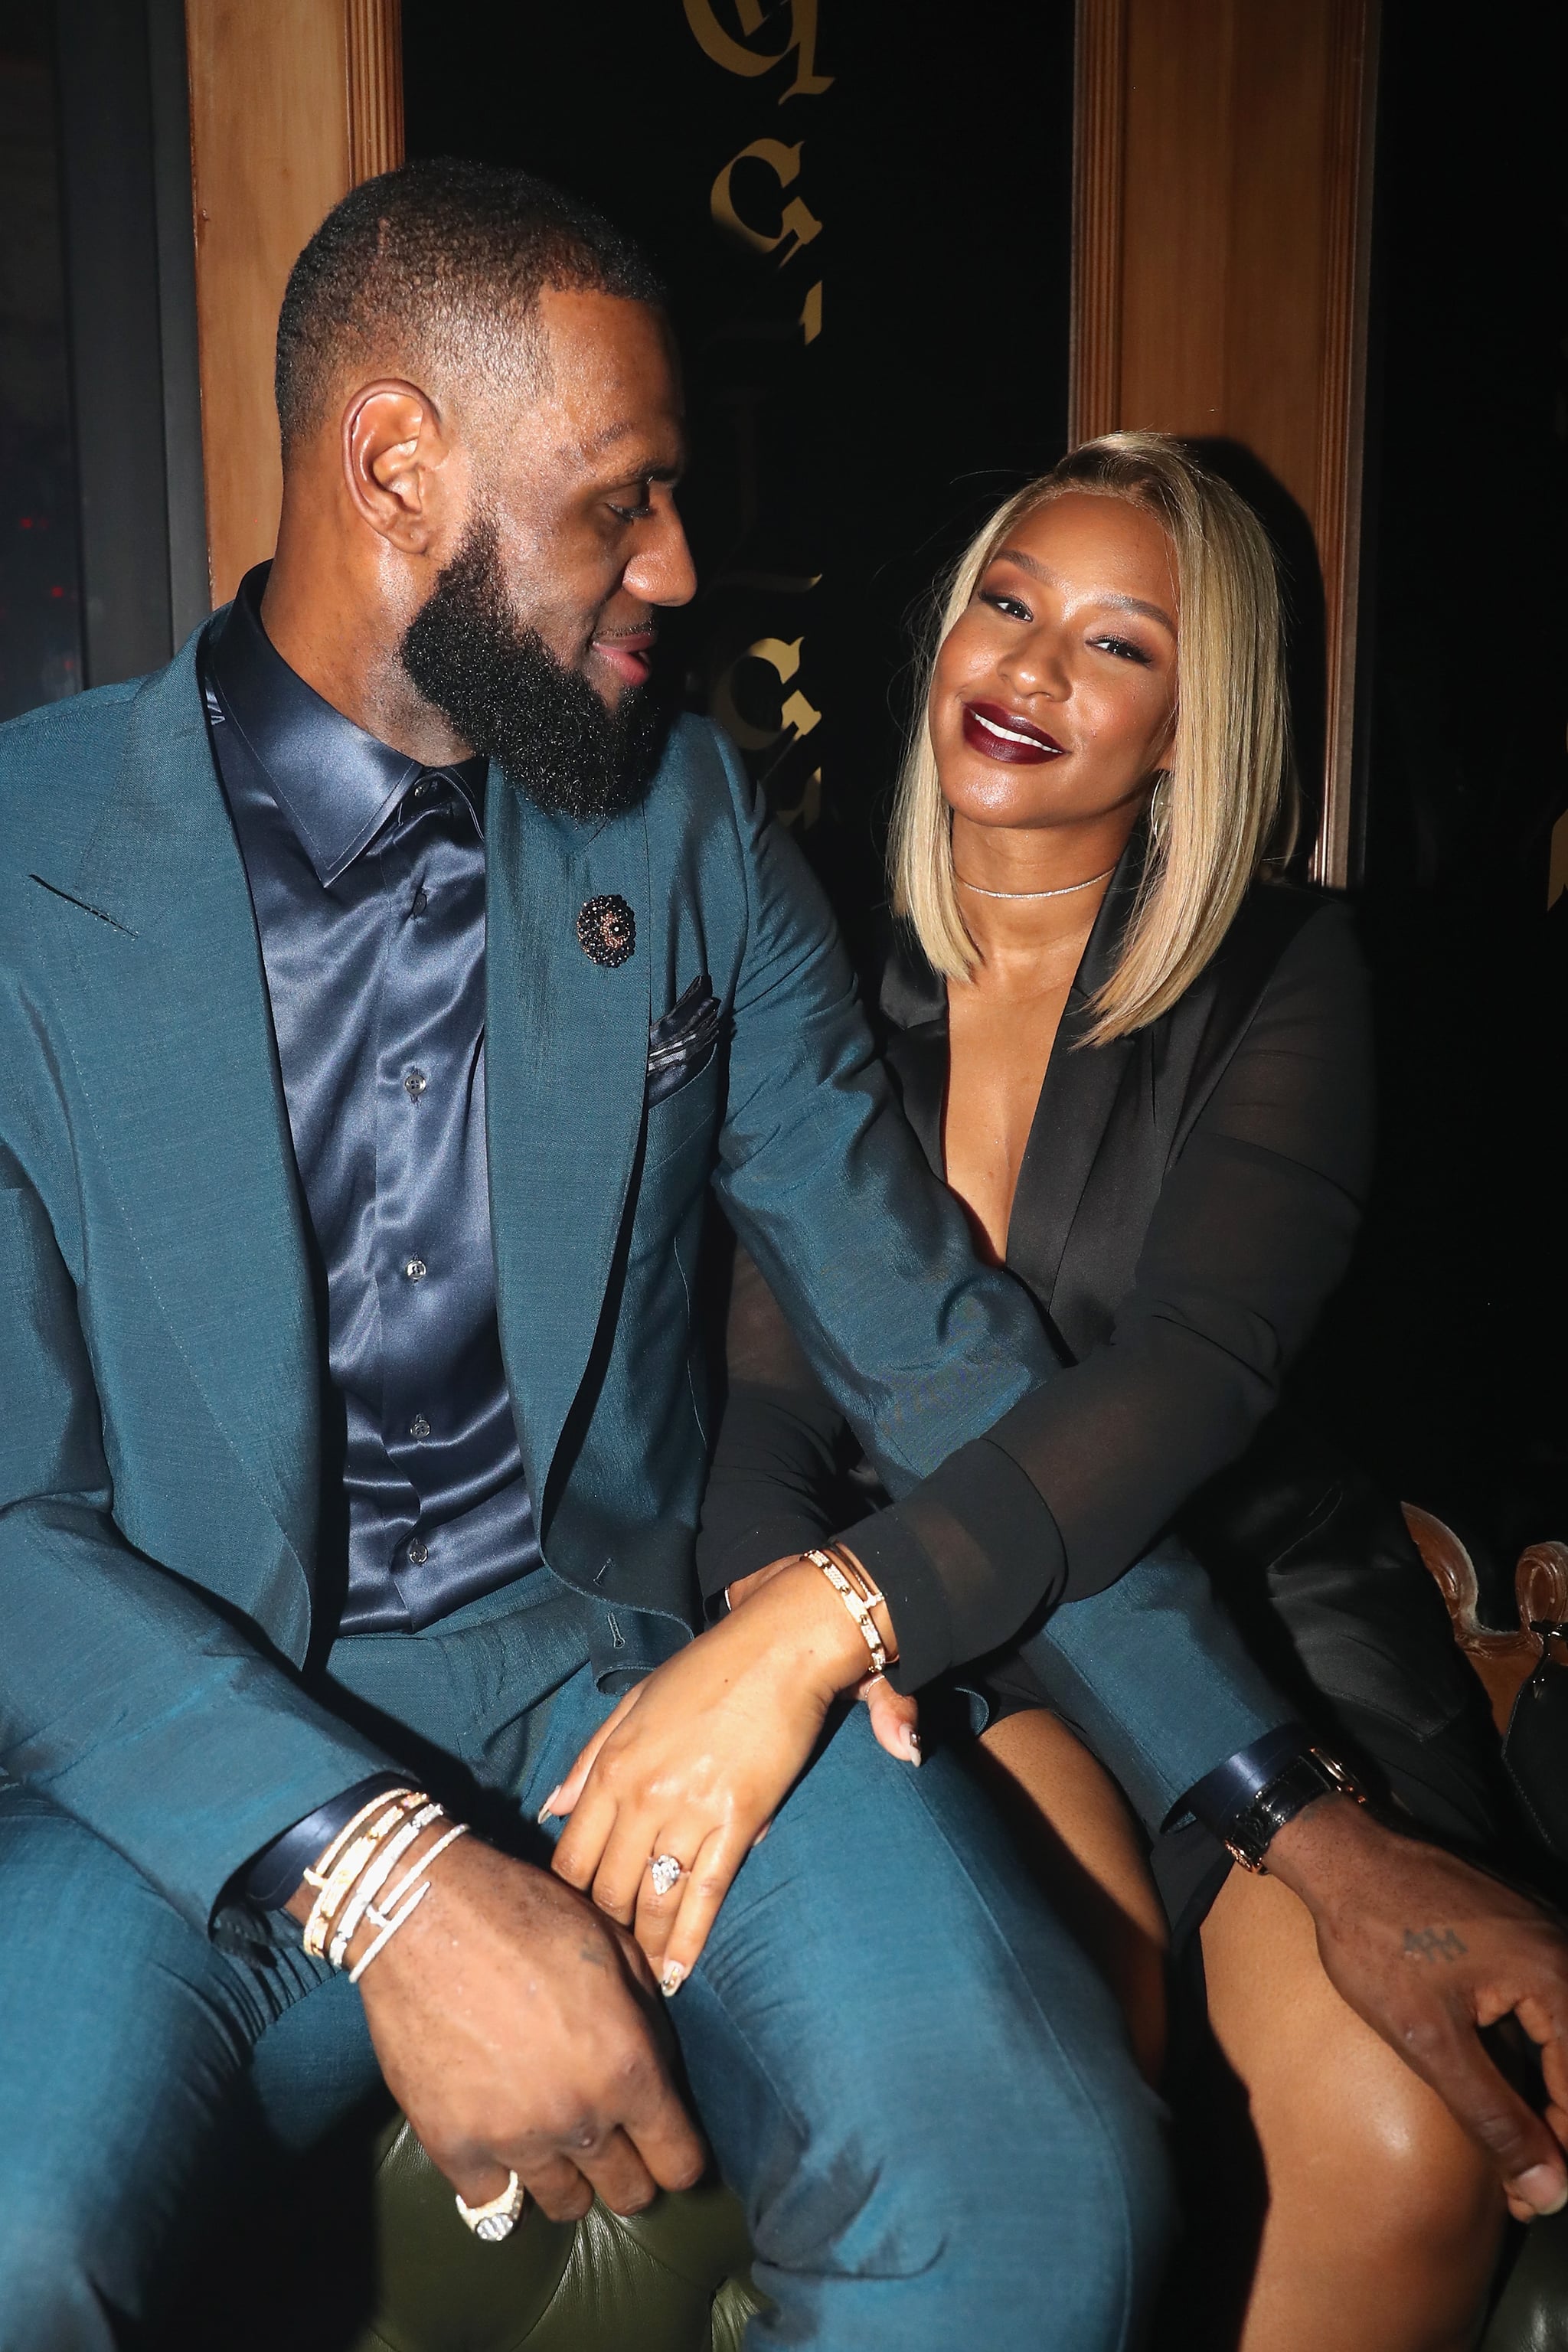 Lebron James Romantically Covers The Bistro To Create A Private Space For His Wife To Enjoy A Piano Symphony Worth Thousands Of Dollars. - Car Magazine TV